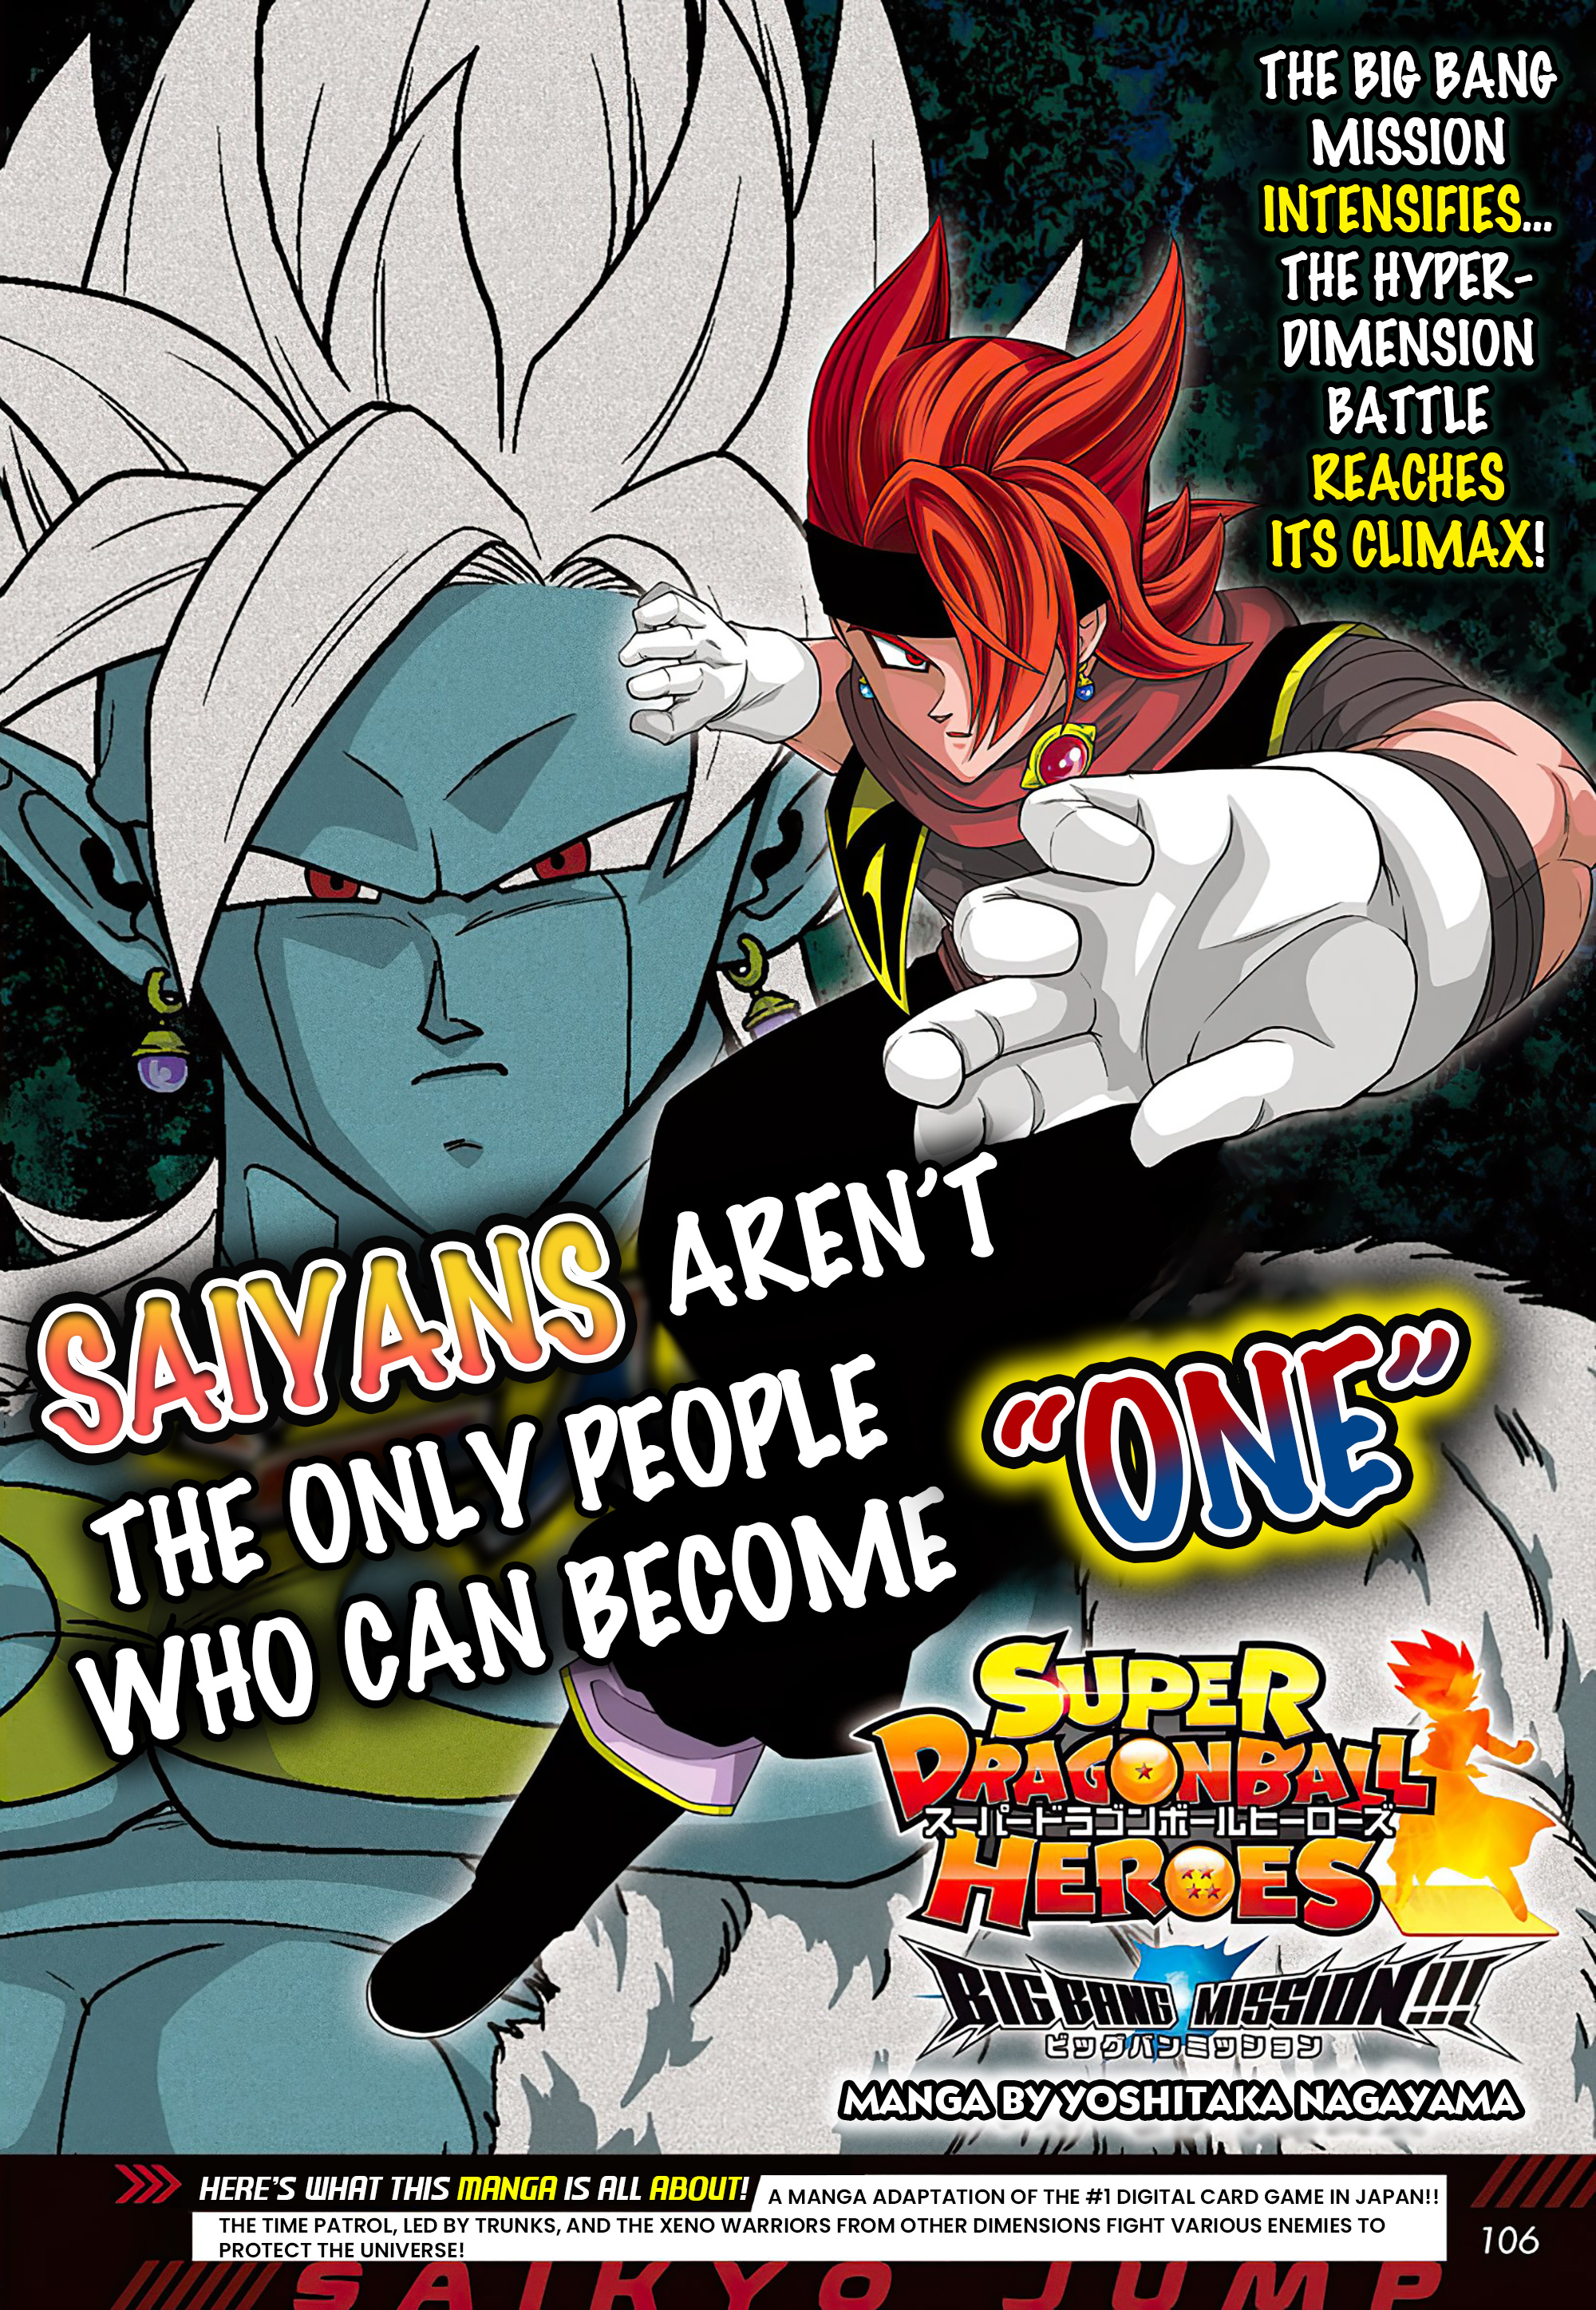 Super Dragon Ball Heroes: Big Bang Mission! Vol.4 Chapter 14: Saiyans Aren't The Only People Who Can Become 